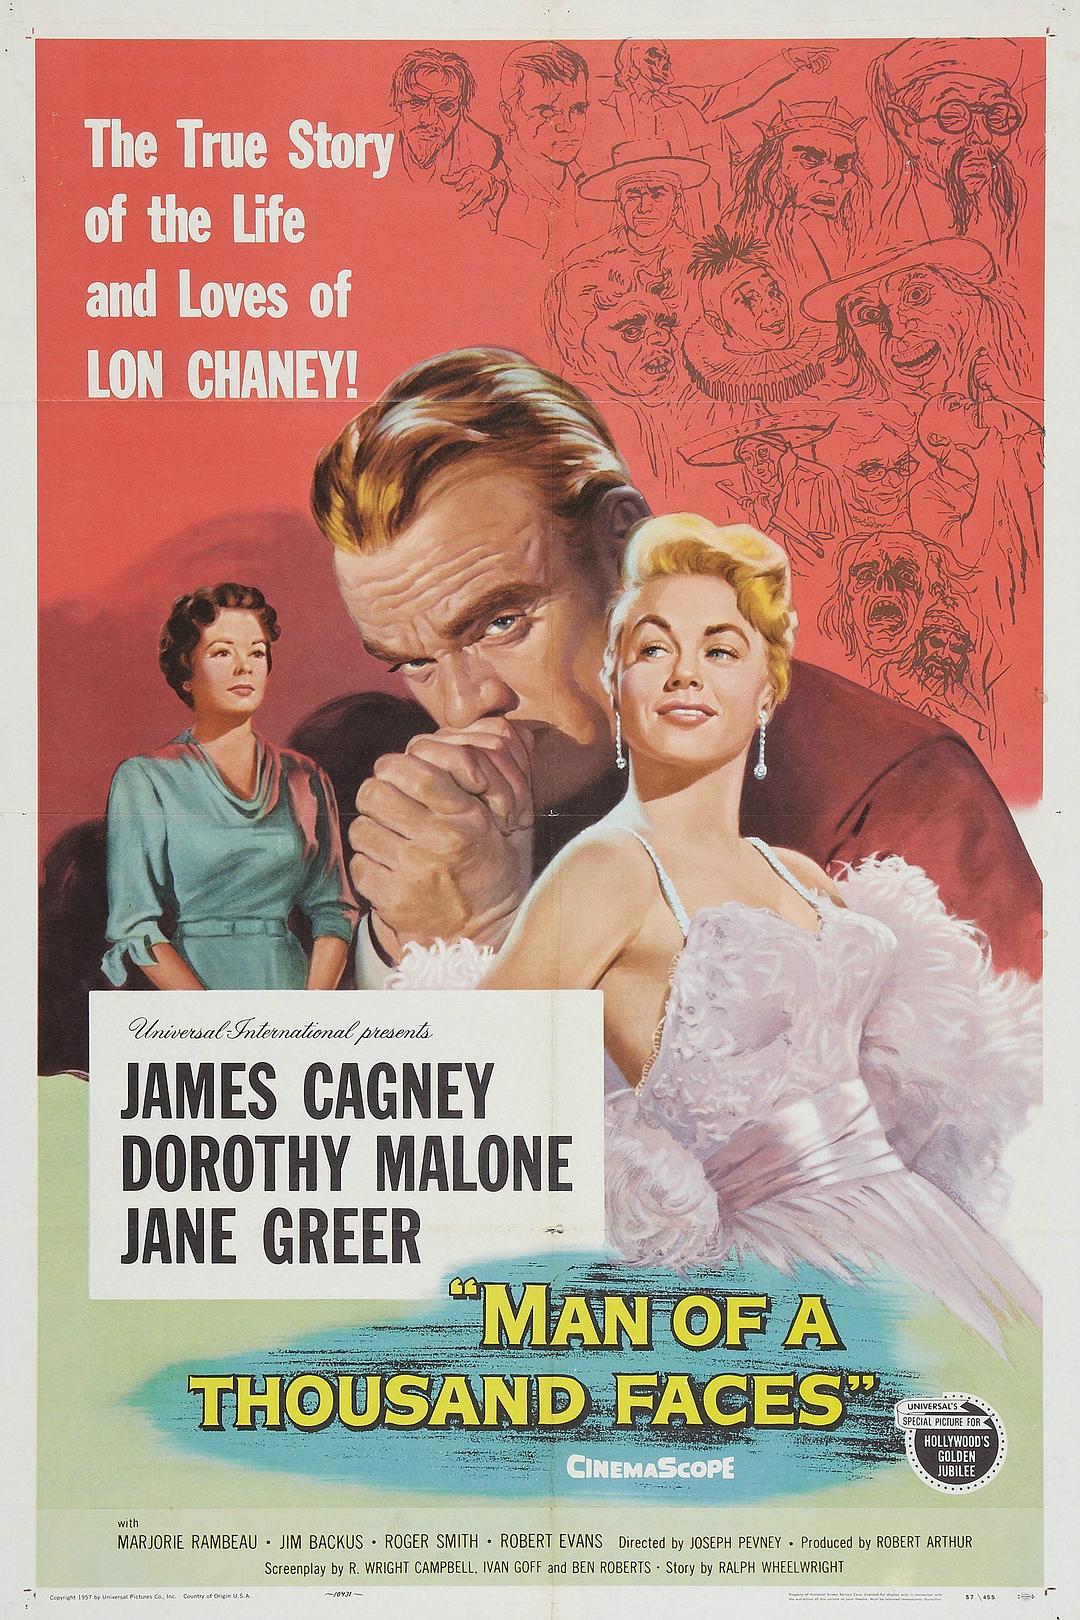 ǧ Man.of.a.Thousand.Faces.1957.1080p.BluRay.REMUX.AVC.DTS-HD.MA.1.0-FGT 31.49G-1.png